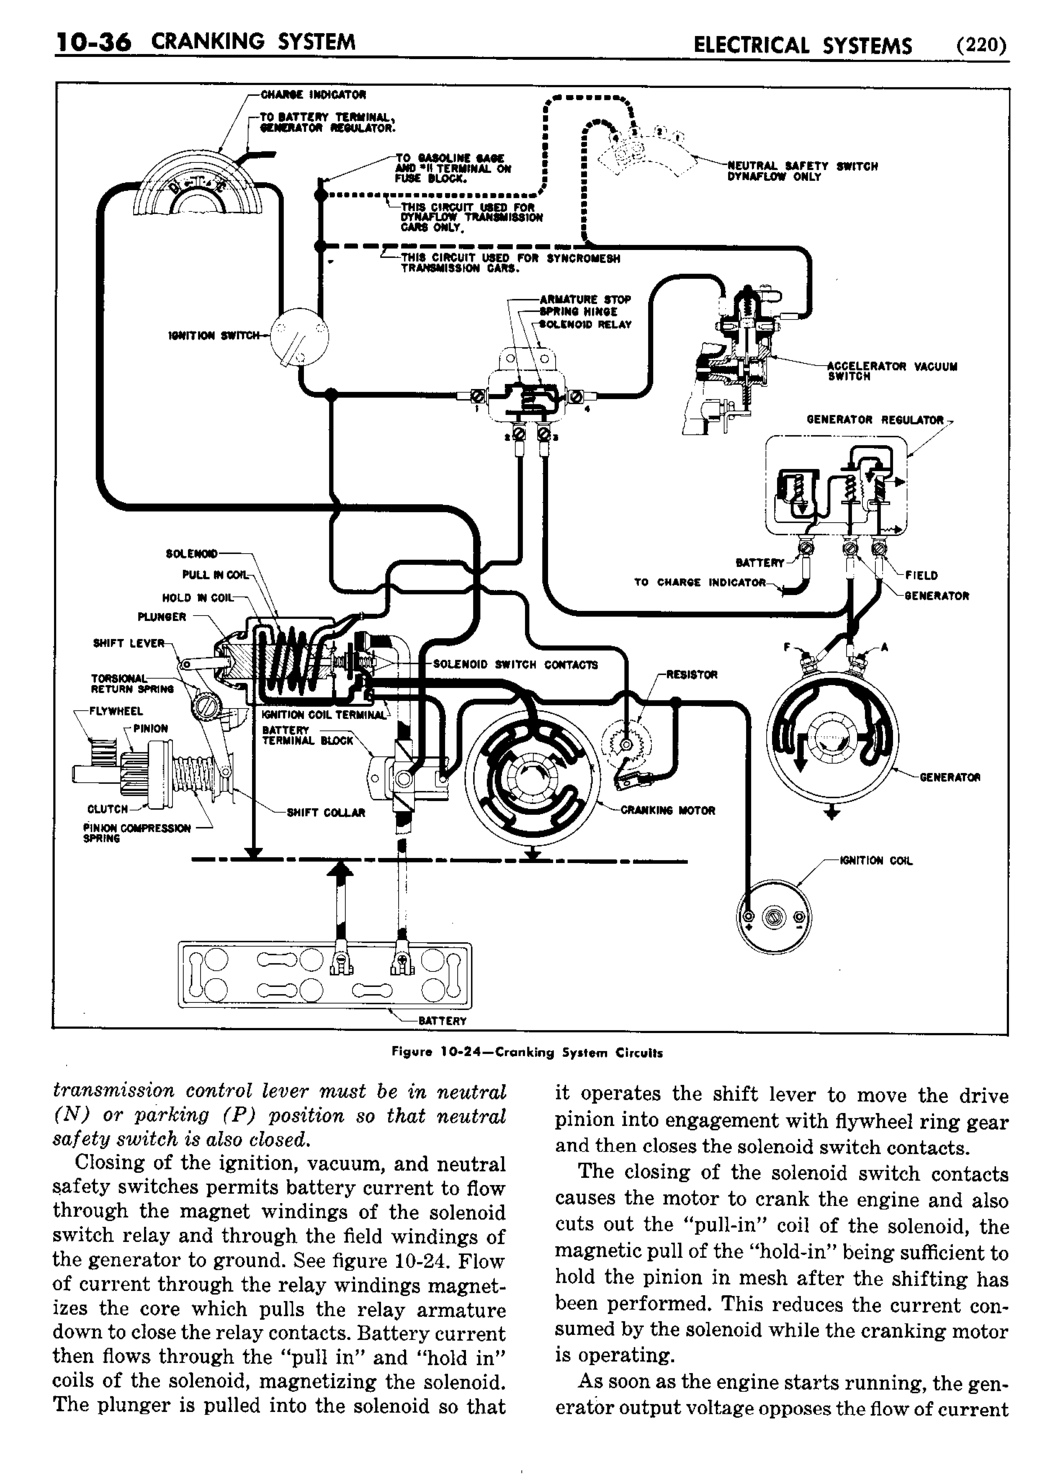 n_11 1953 Buick Shop Manual - Electrical Systems-036-036.jpg